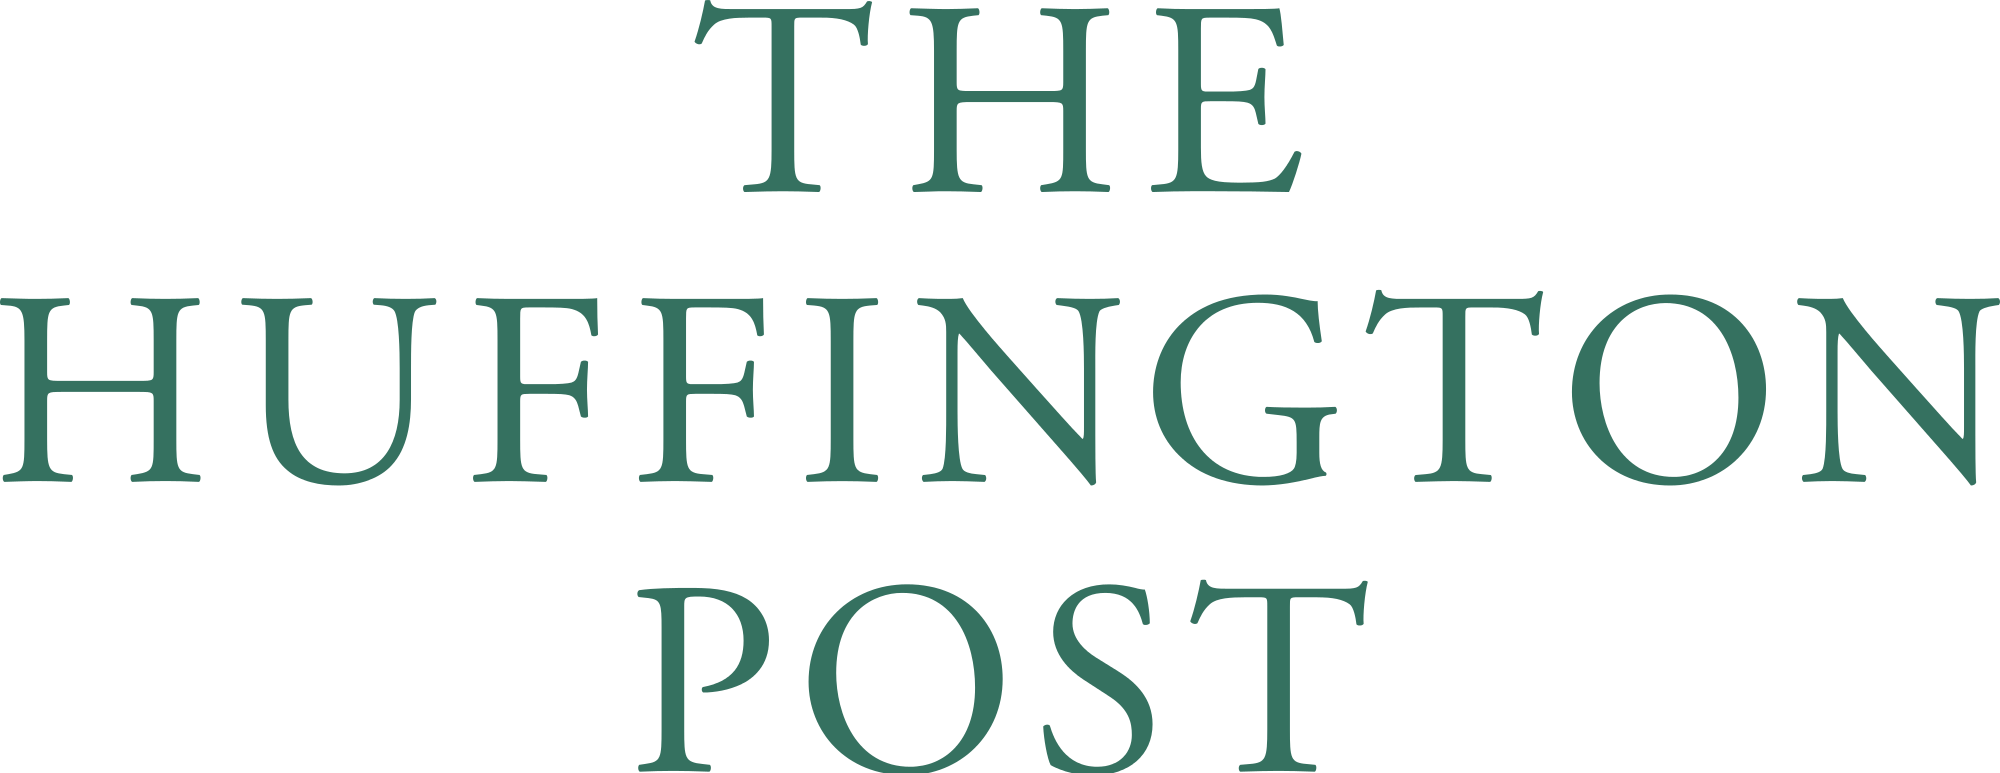 The_Huffington_Post_logo.png